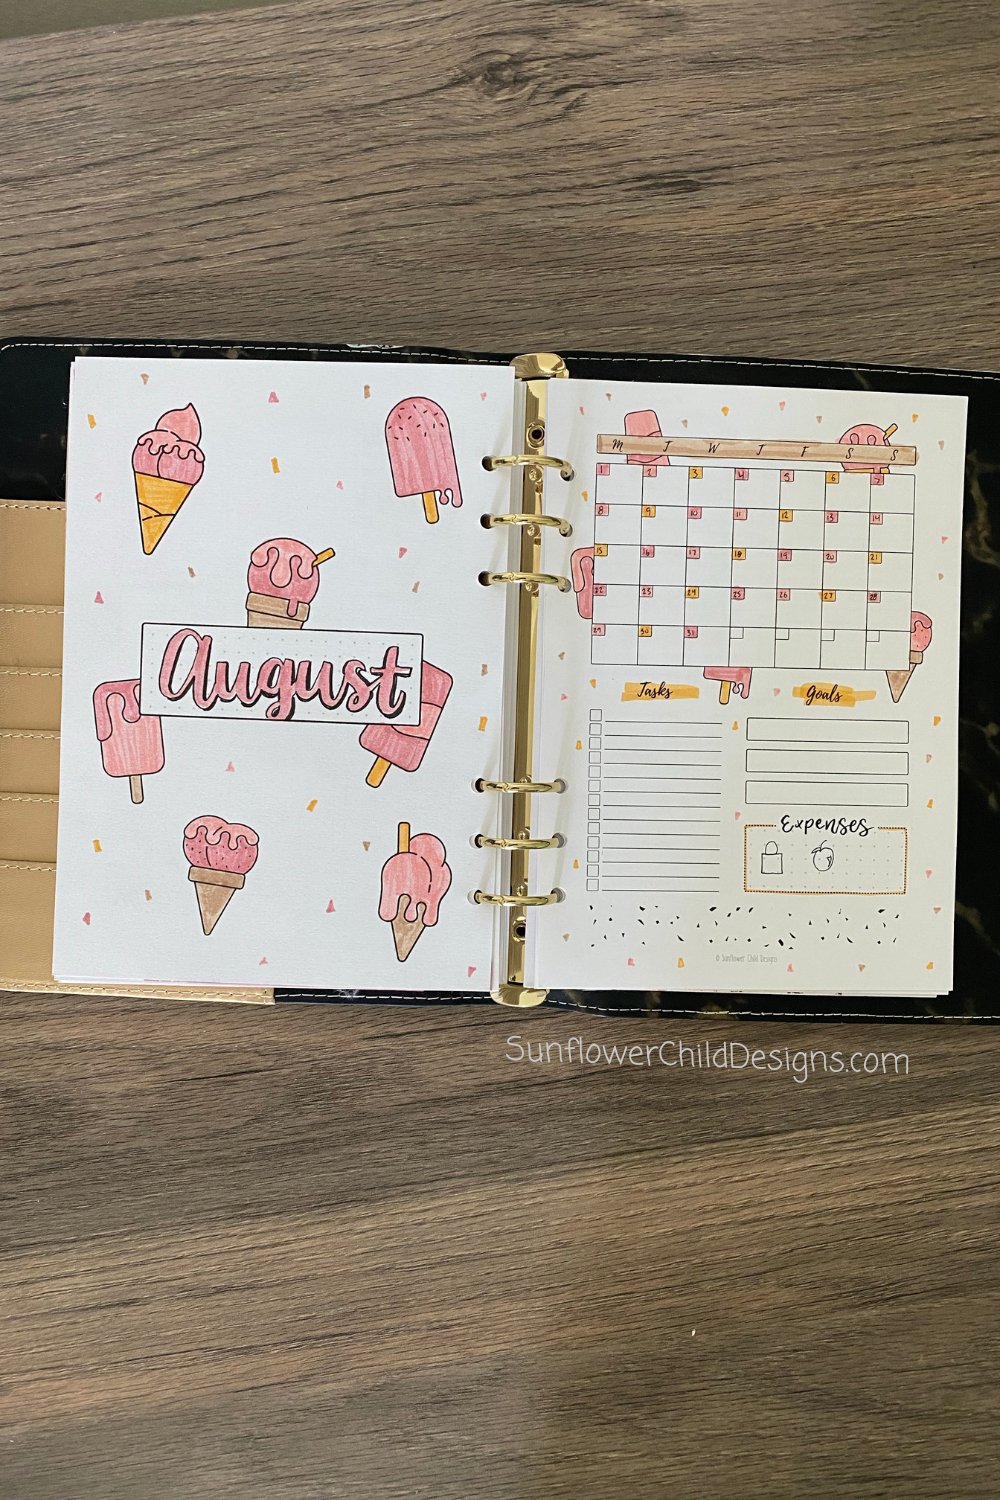 3 Moving Spread Ideas for your Bullet Journal + Free Printable